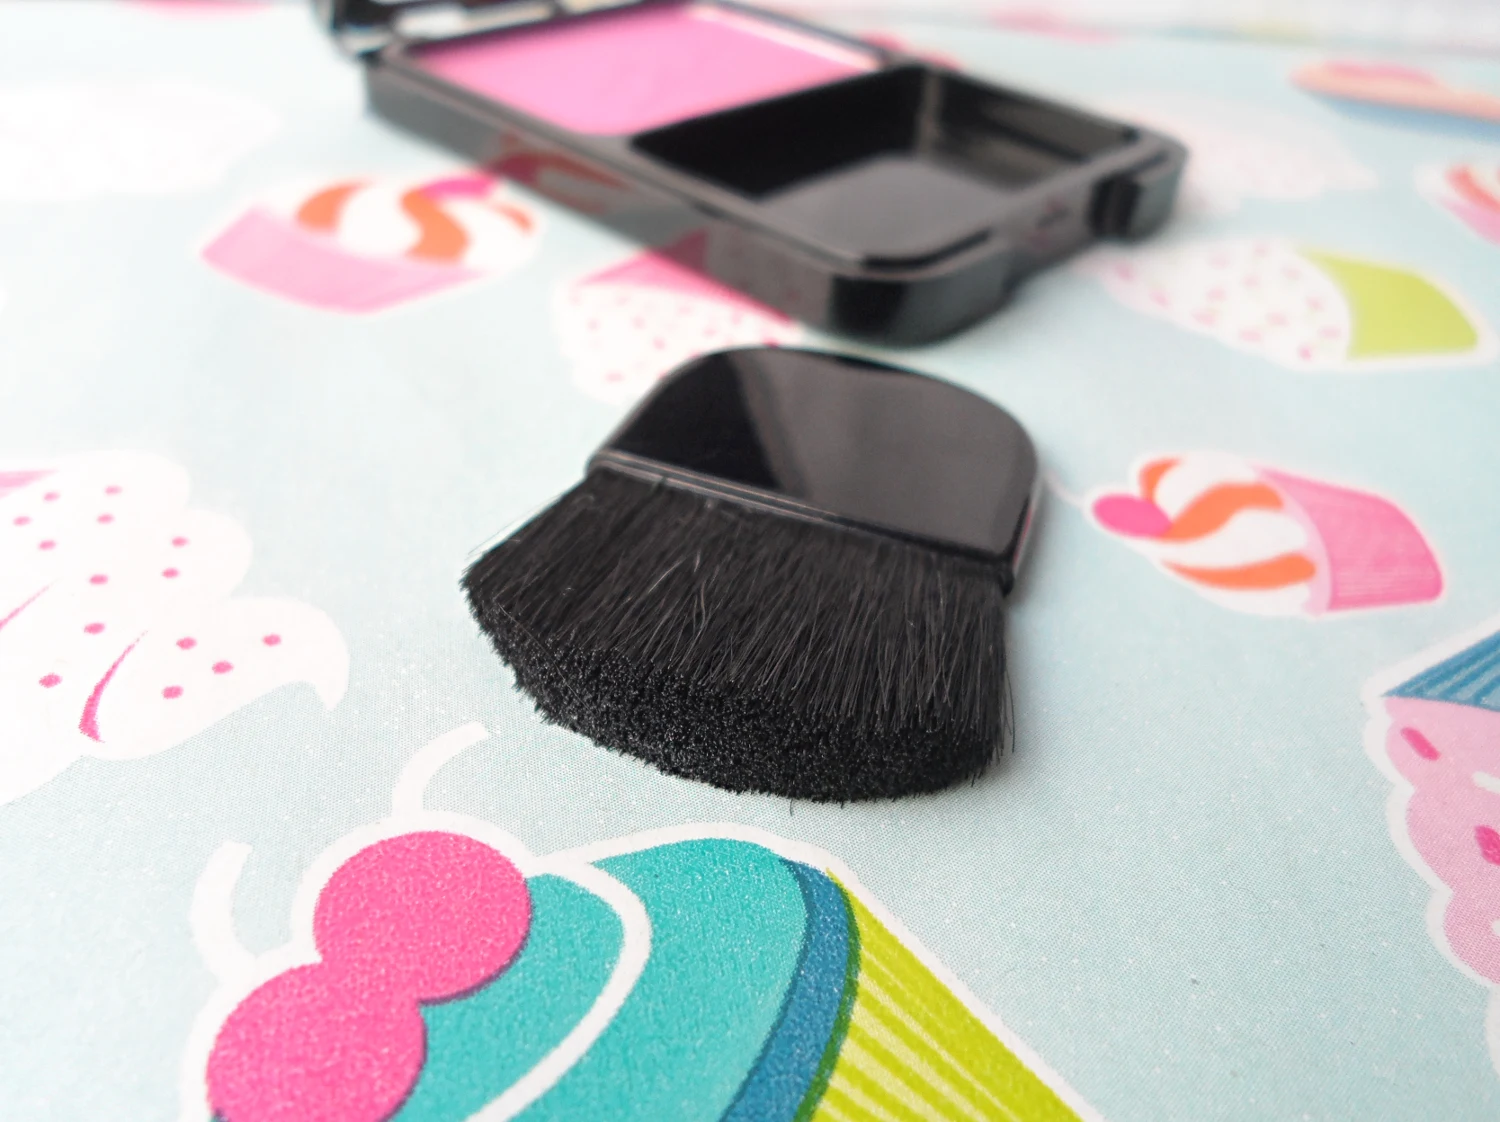 Beauty UK cosmetics review Beauty UK Blush & Brush Review and Swatches by blogger